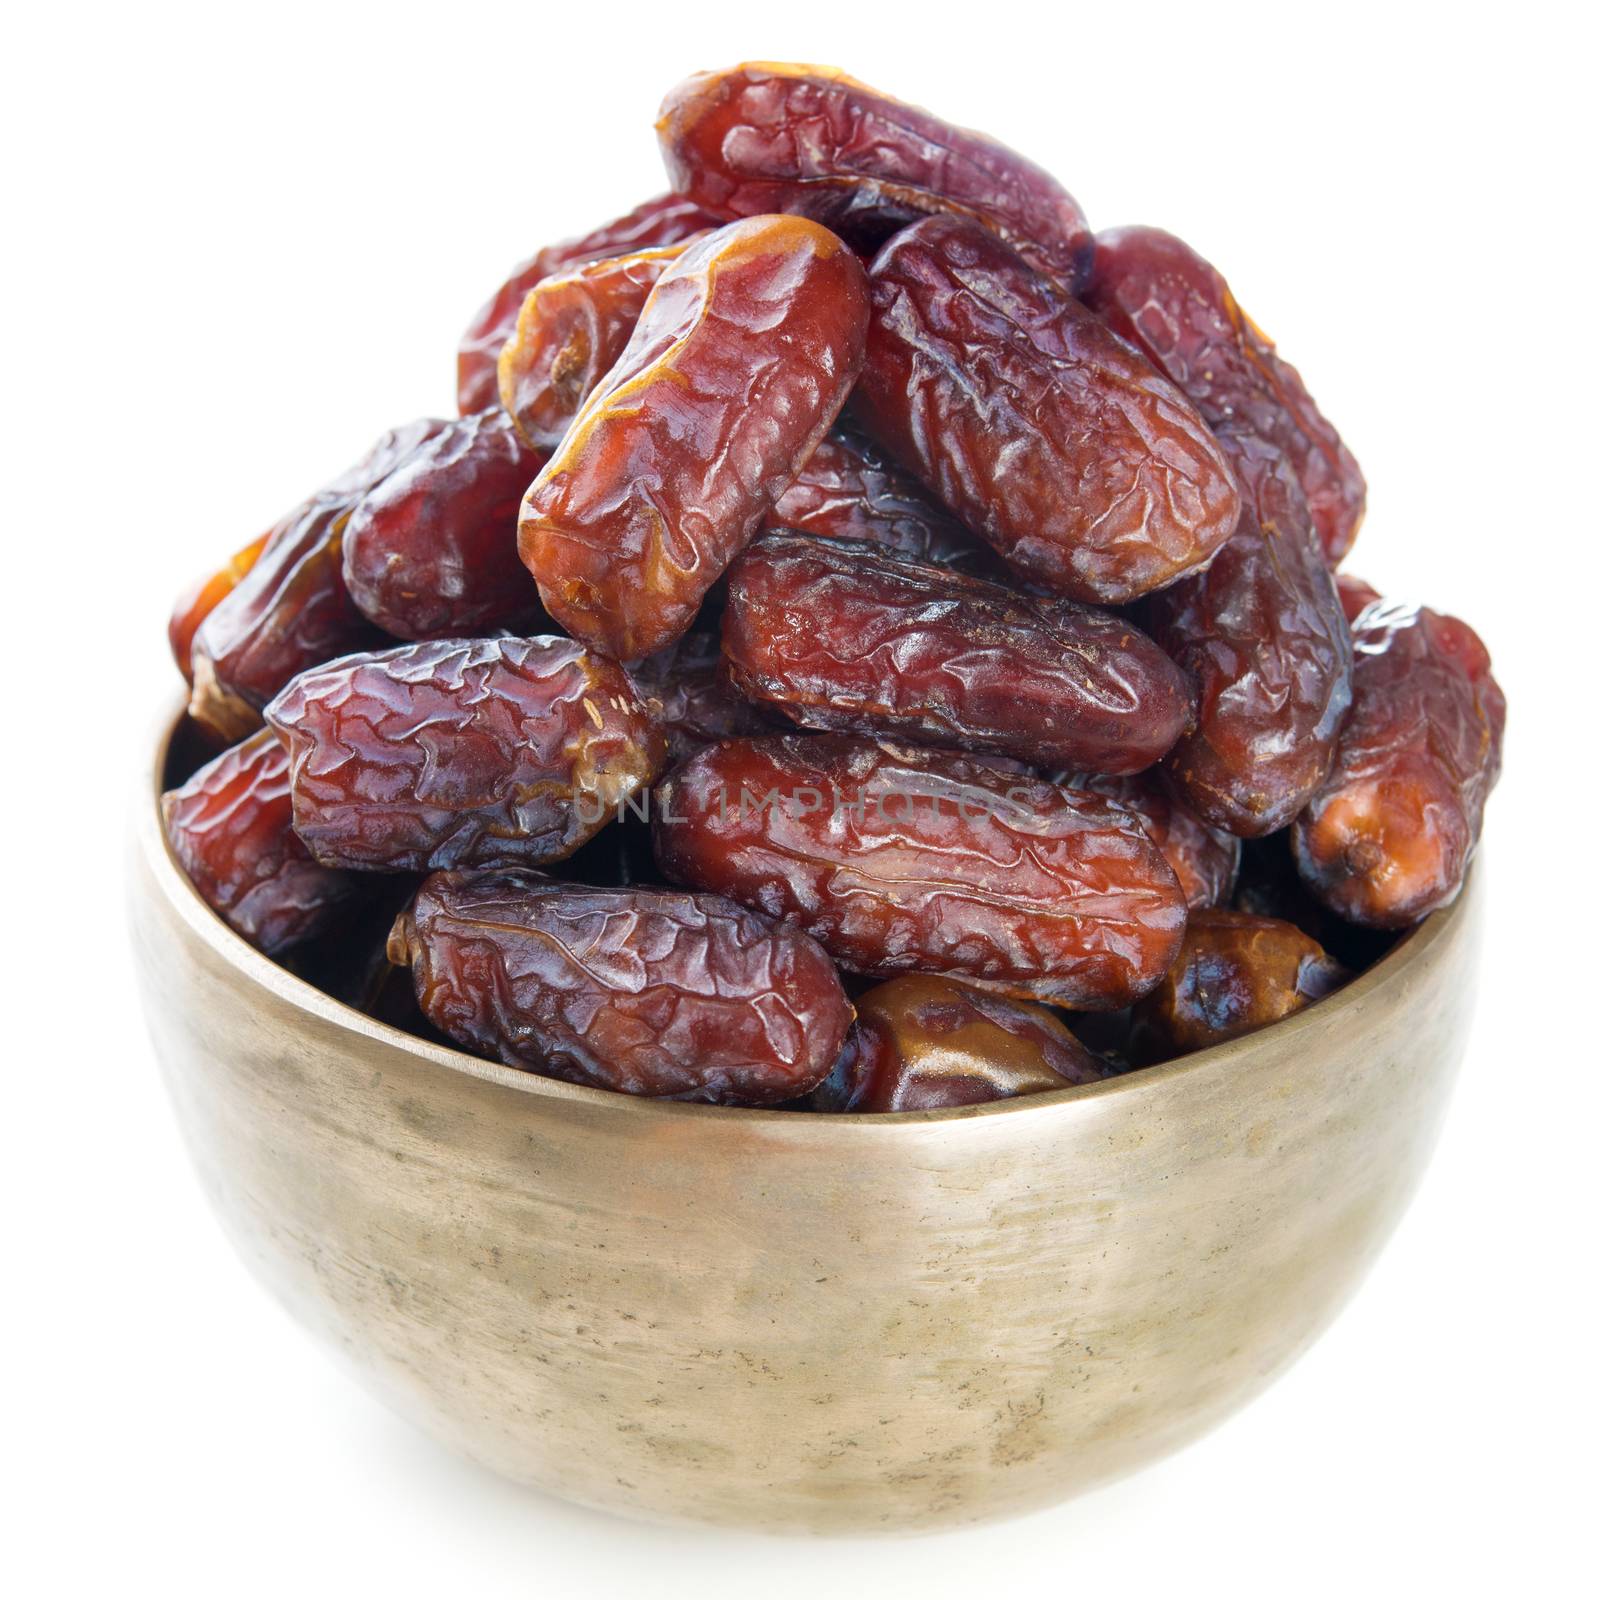 Dried date palm fruits or kurma, ramadan food which eaten in fasting month. Pile of fresh dried date fruits in golden metal bowl isolated on white background.